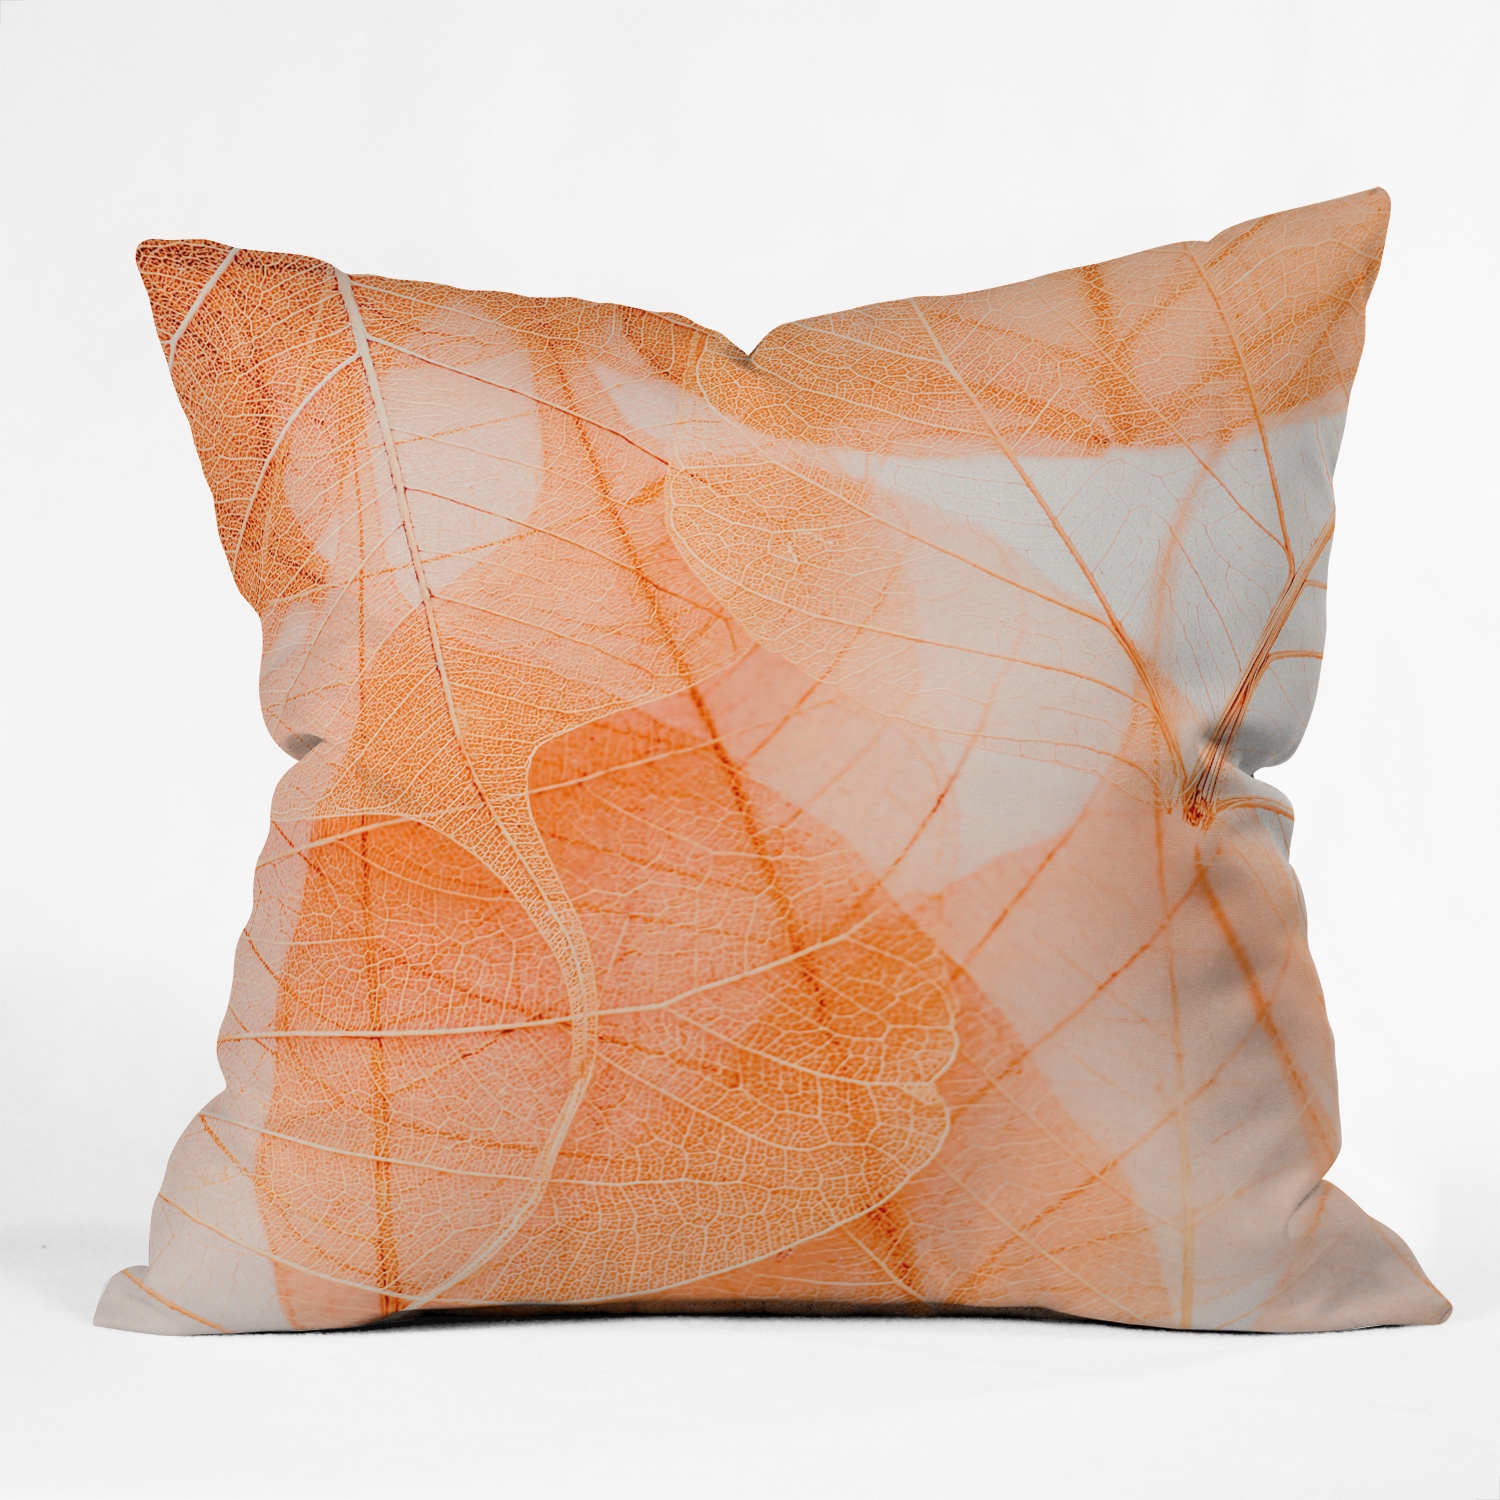 Orange Marmalade by Ingrid Beddoes - Outdoor Throw Pillow 26" x 26" - Image 1